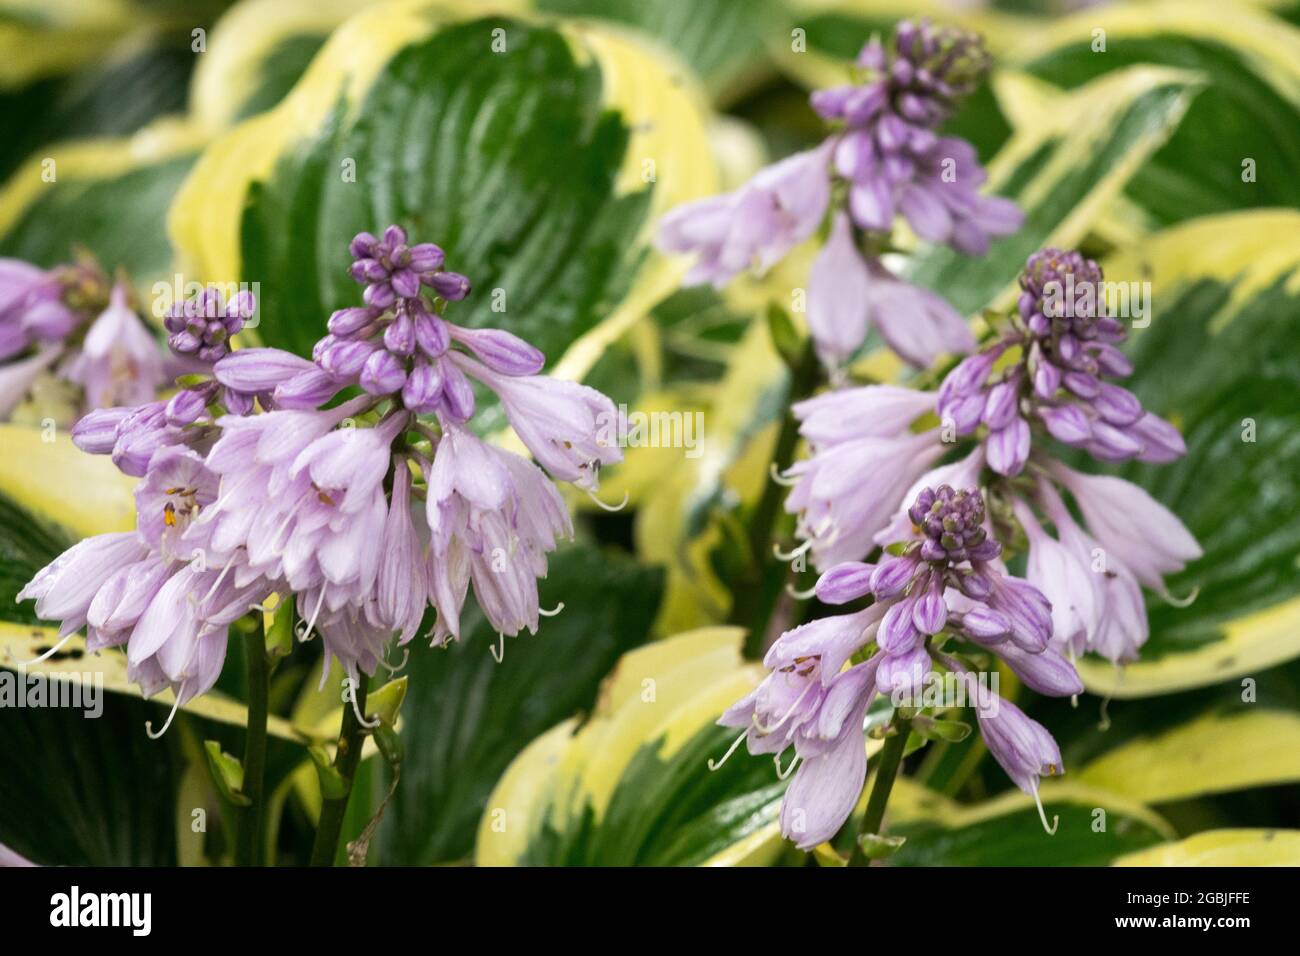 Flowers Hosta 'Queen Josephine' hosta variegated leaves Plantain Lily in July garden Stock Photo